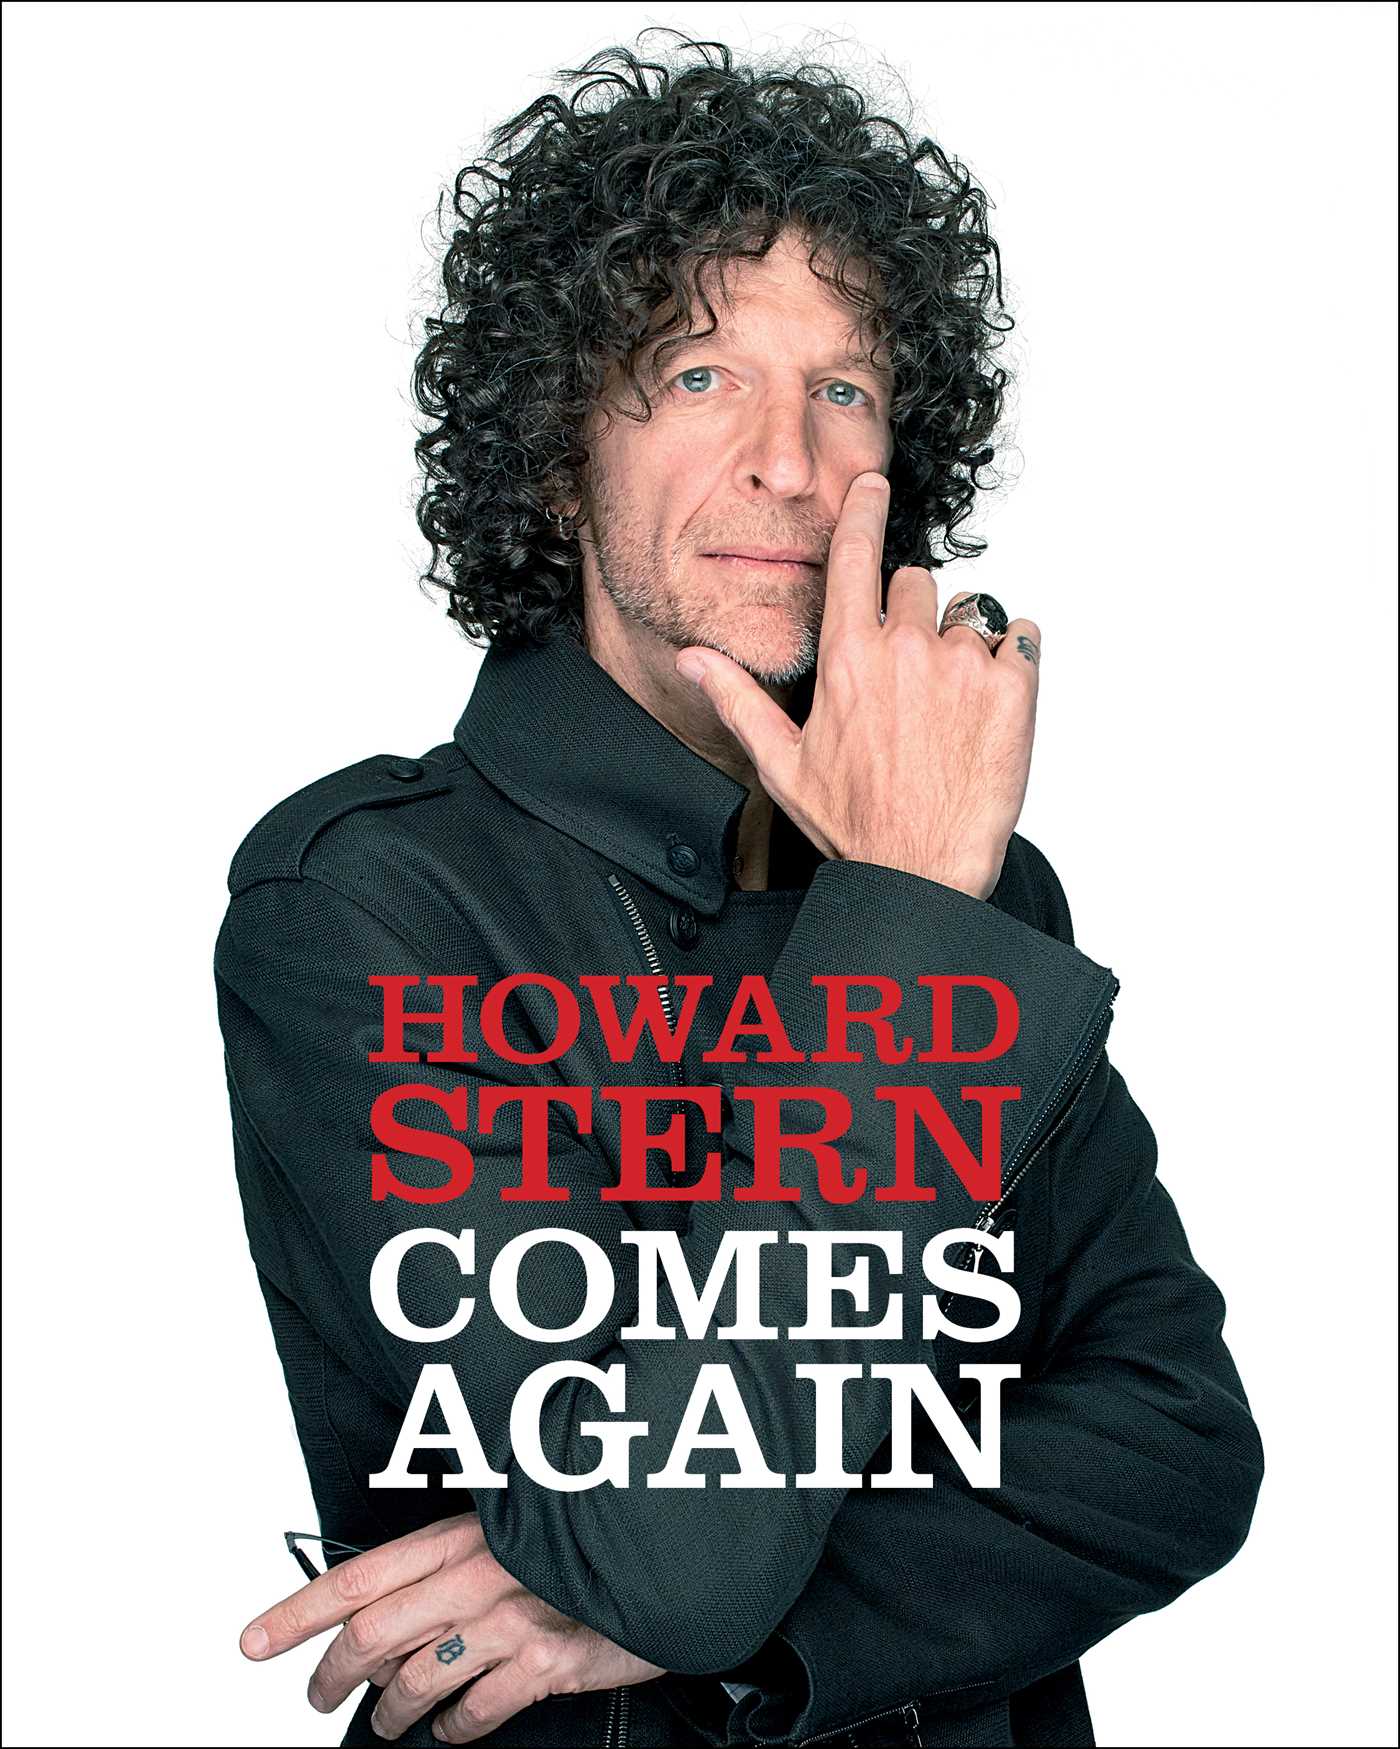 The cover of Howard Stern Comes Again